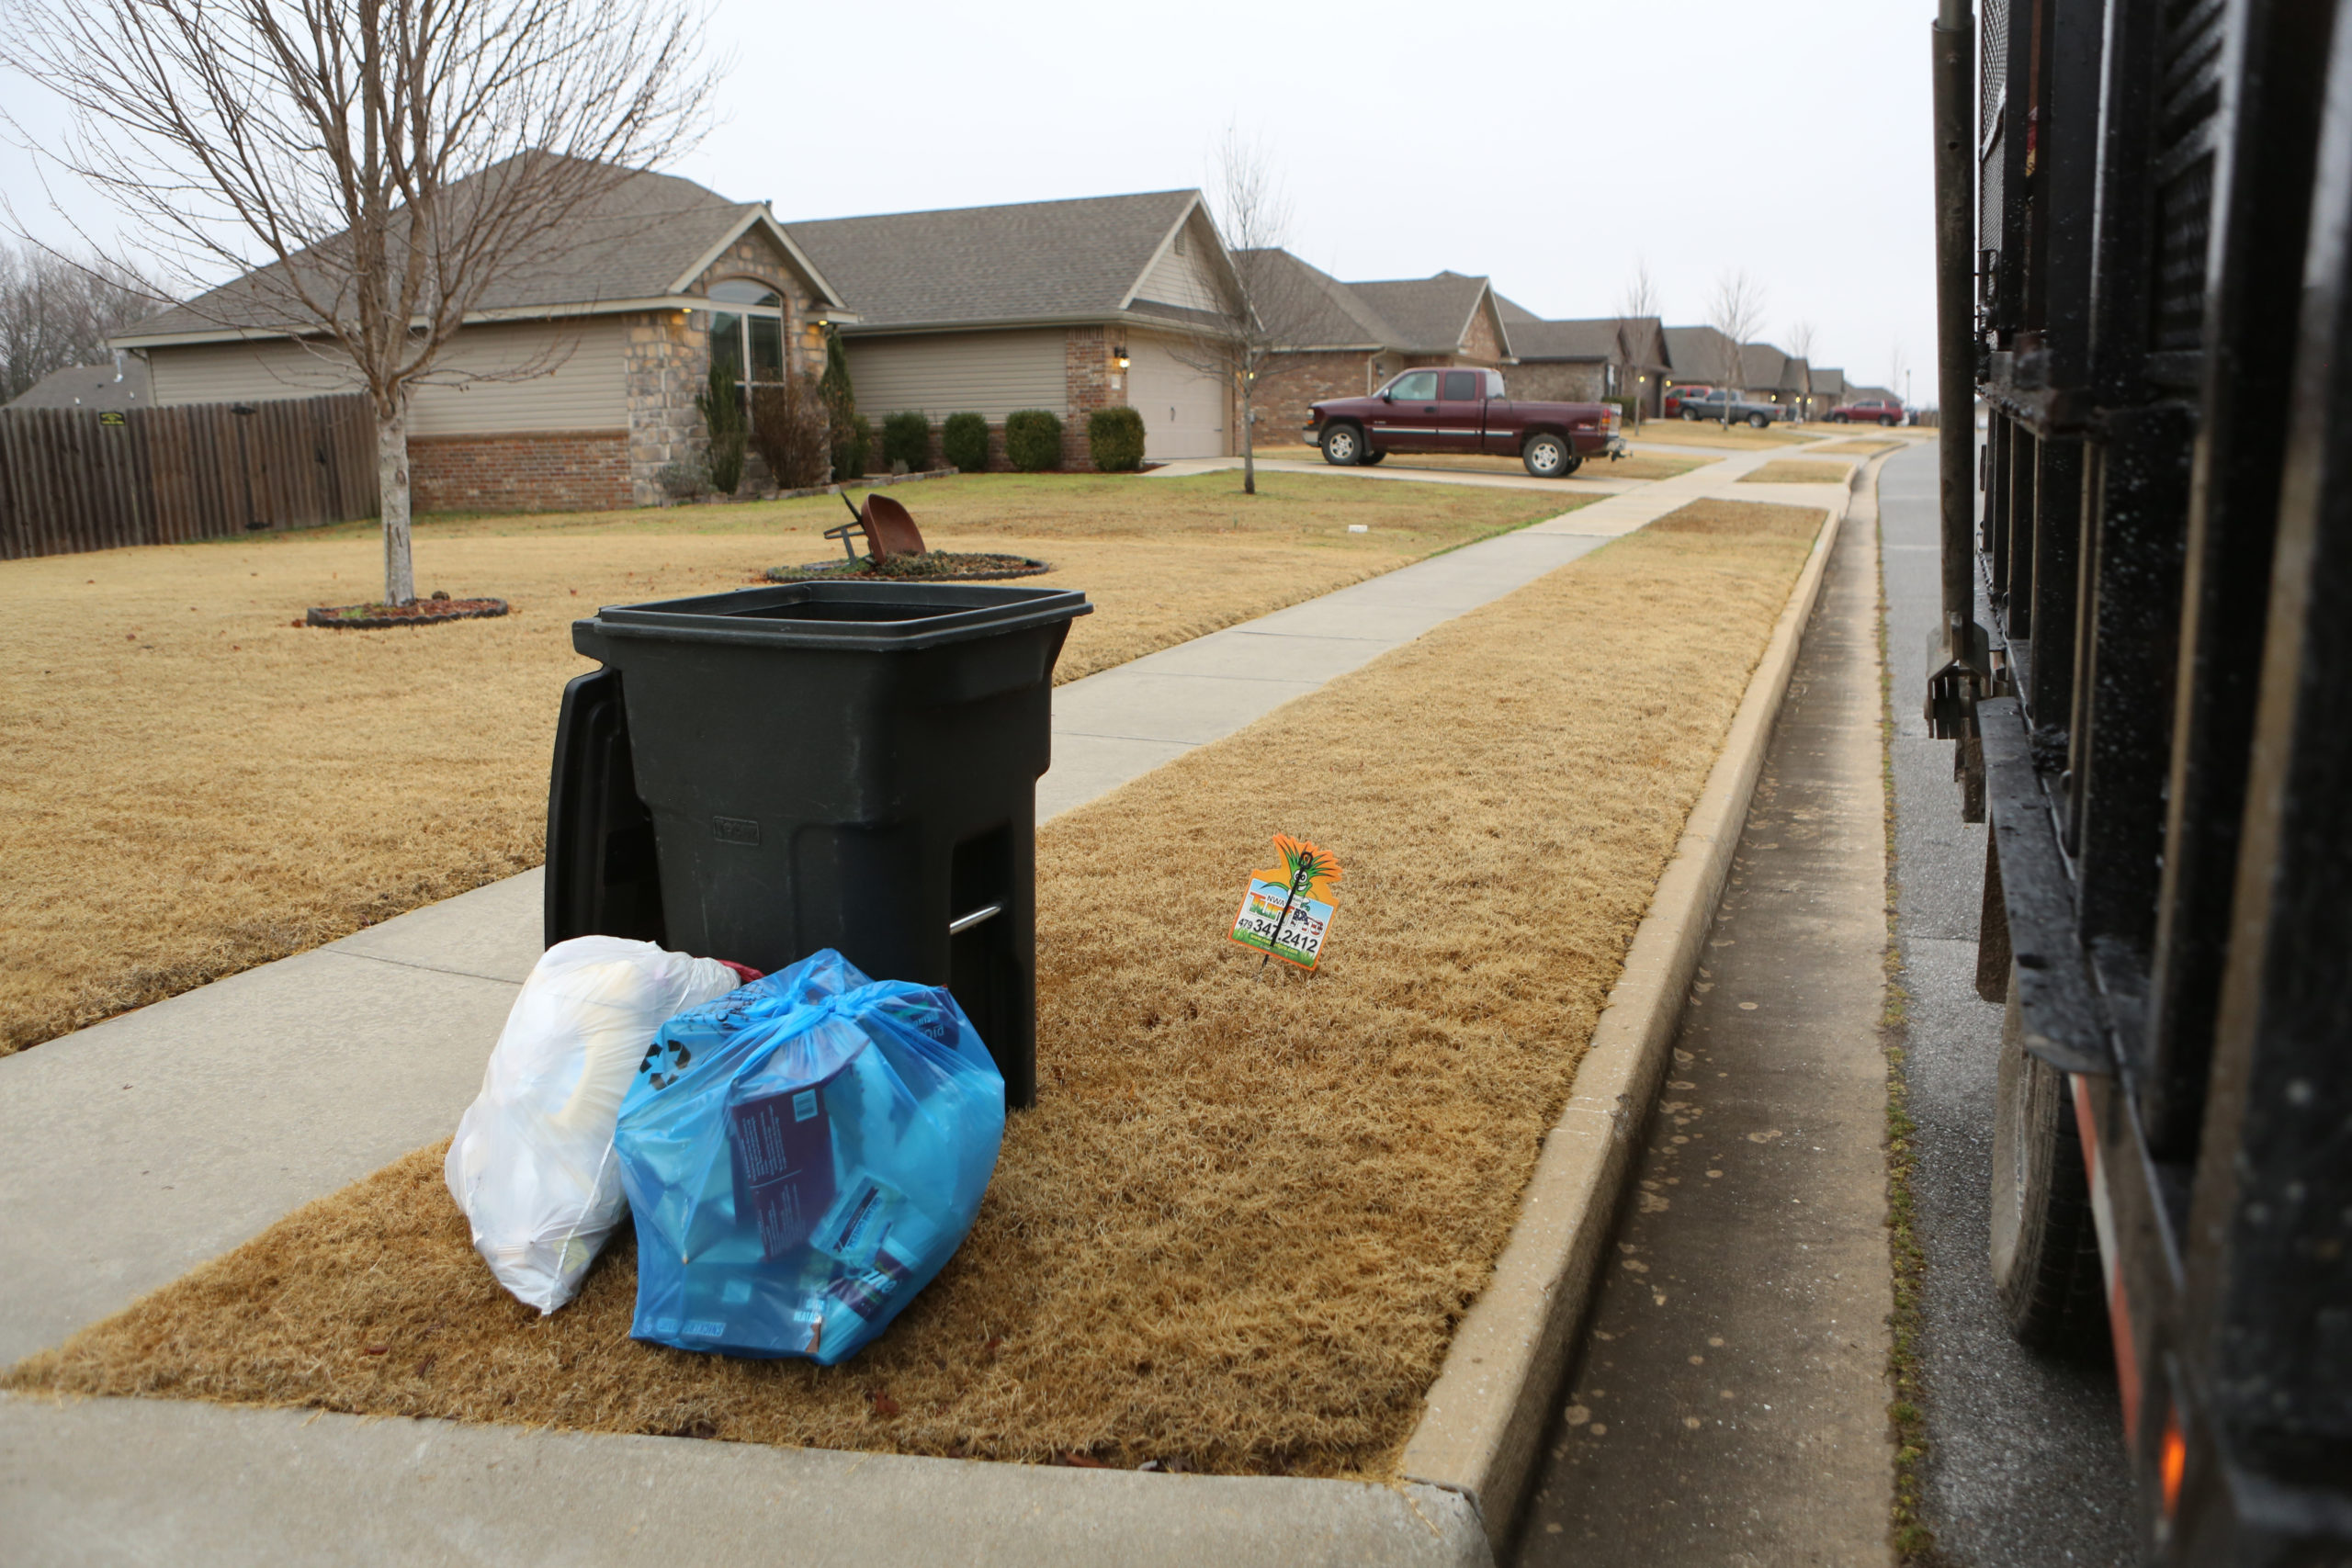 Rural trash service adds curbside recycling option